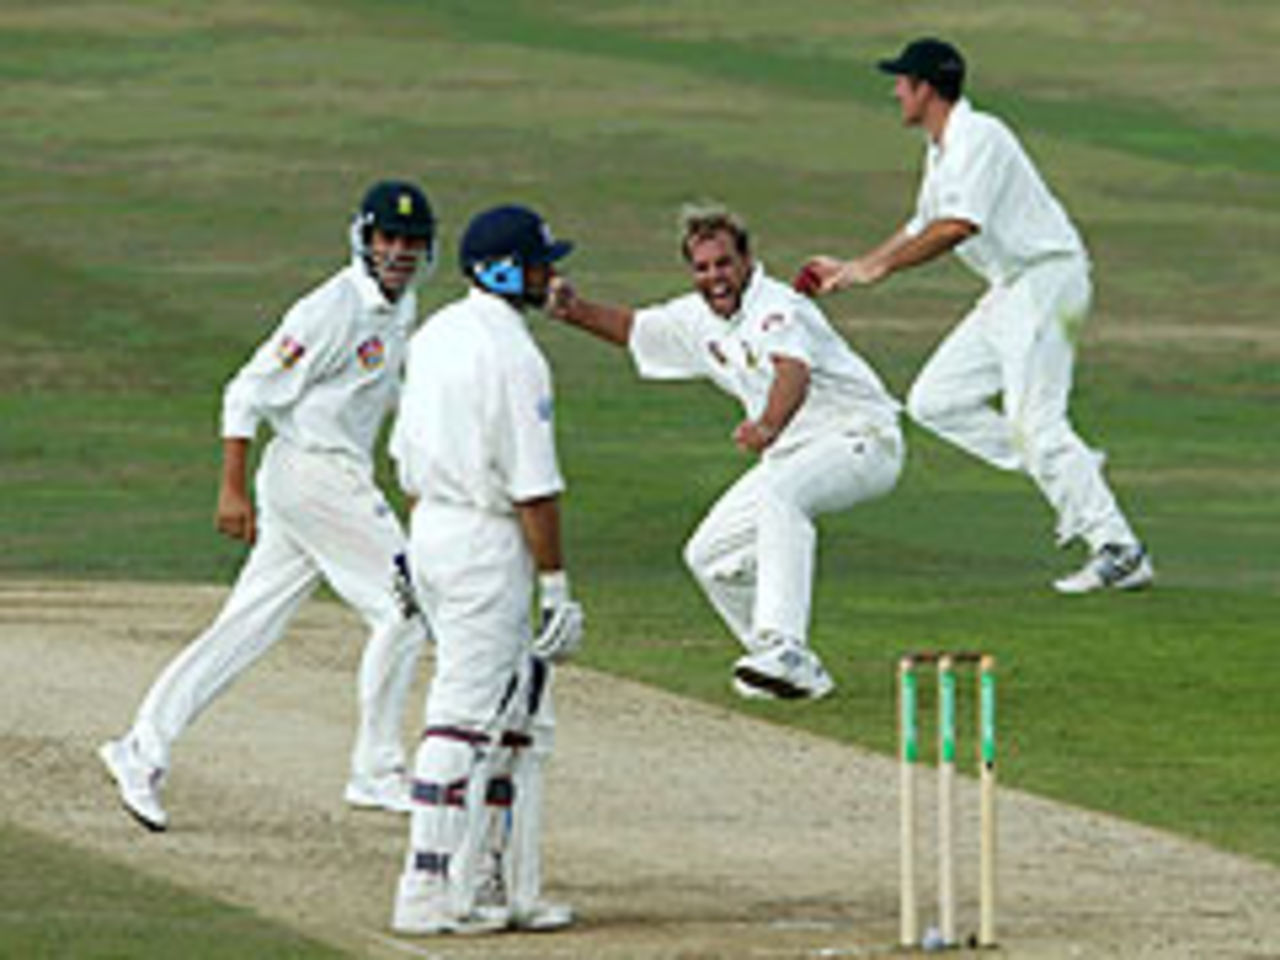 The South Africans are euphoric as Nasser Hussain falls lbw to Jacques Kallis